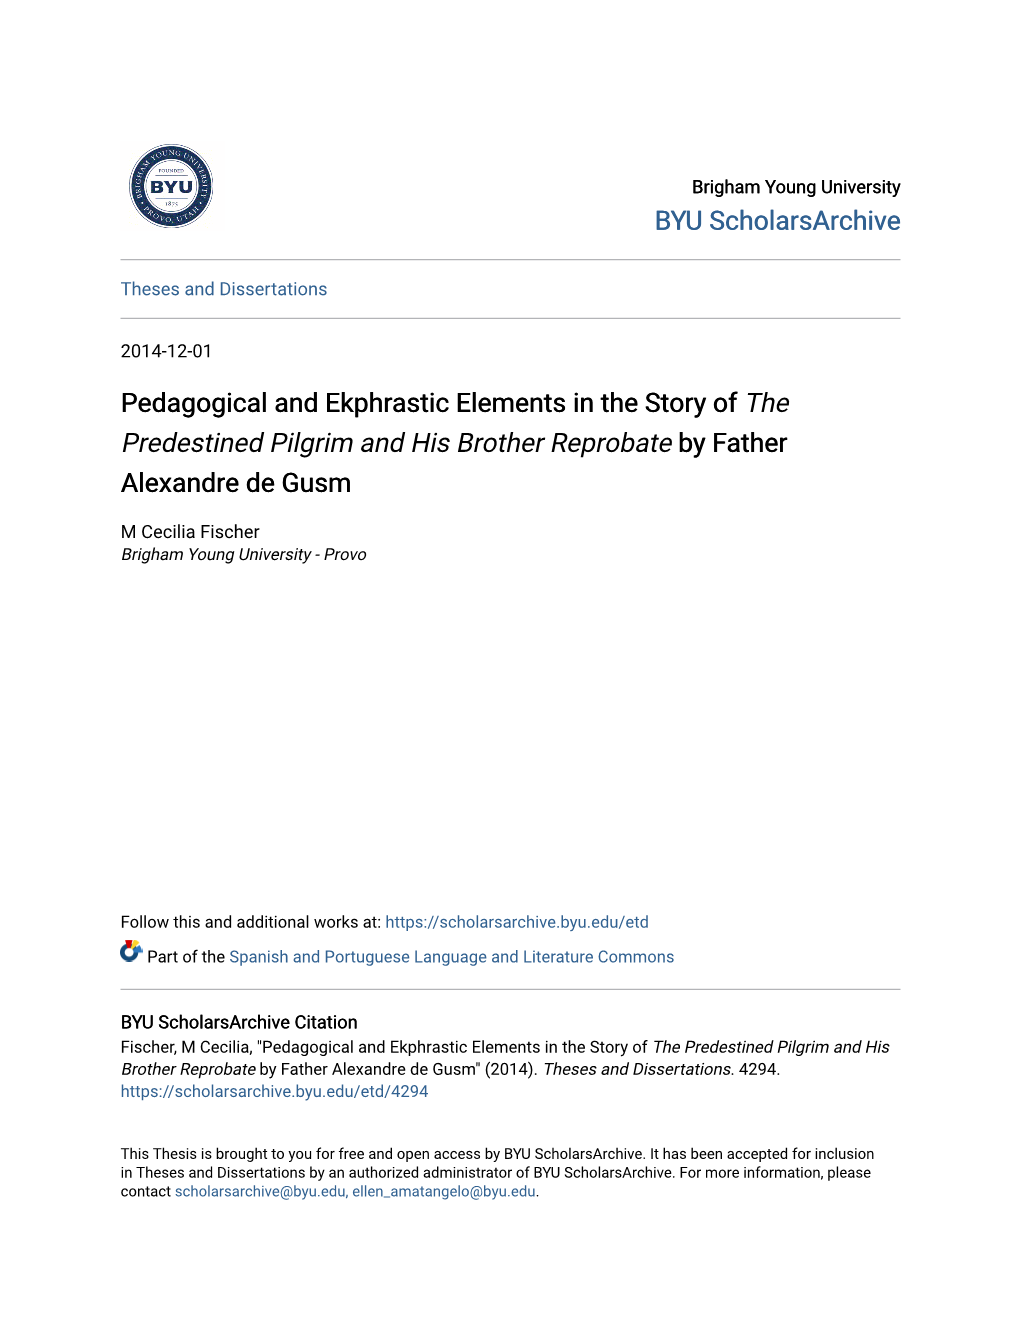 Pedagogical and Ekphrastic Elements in the Story of the Predestined Pilgrim and His Brother Reprobate by Father Alexandre De Gusm